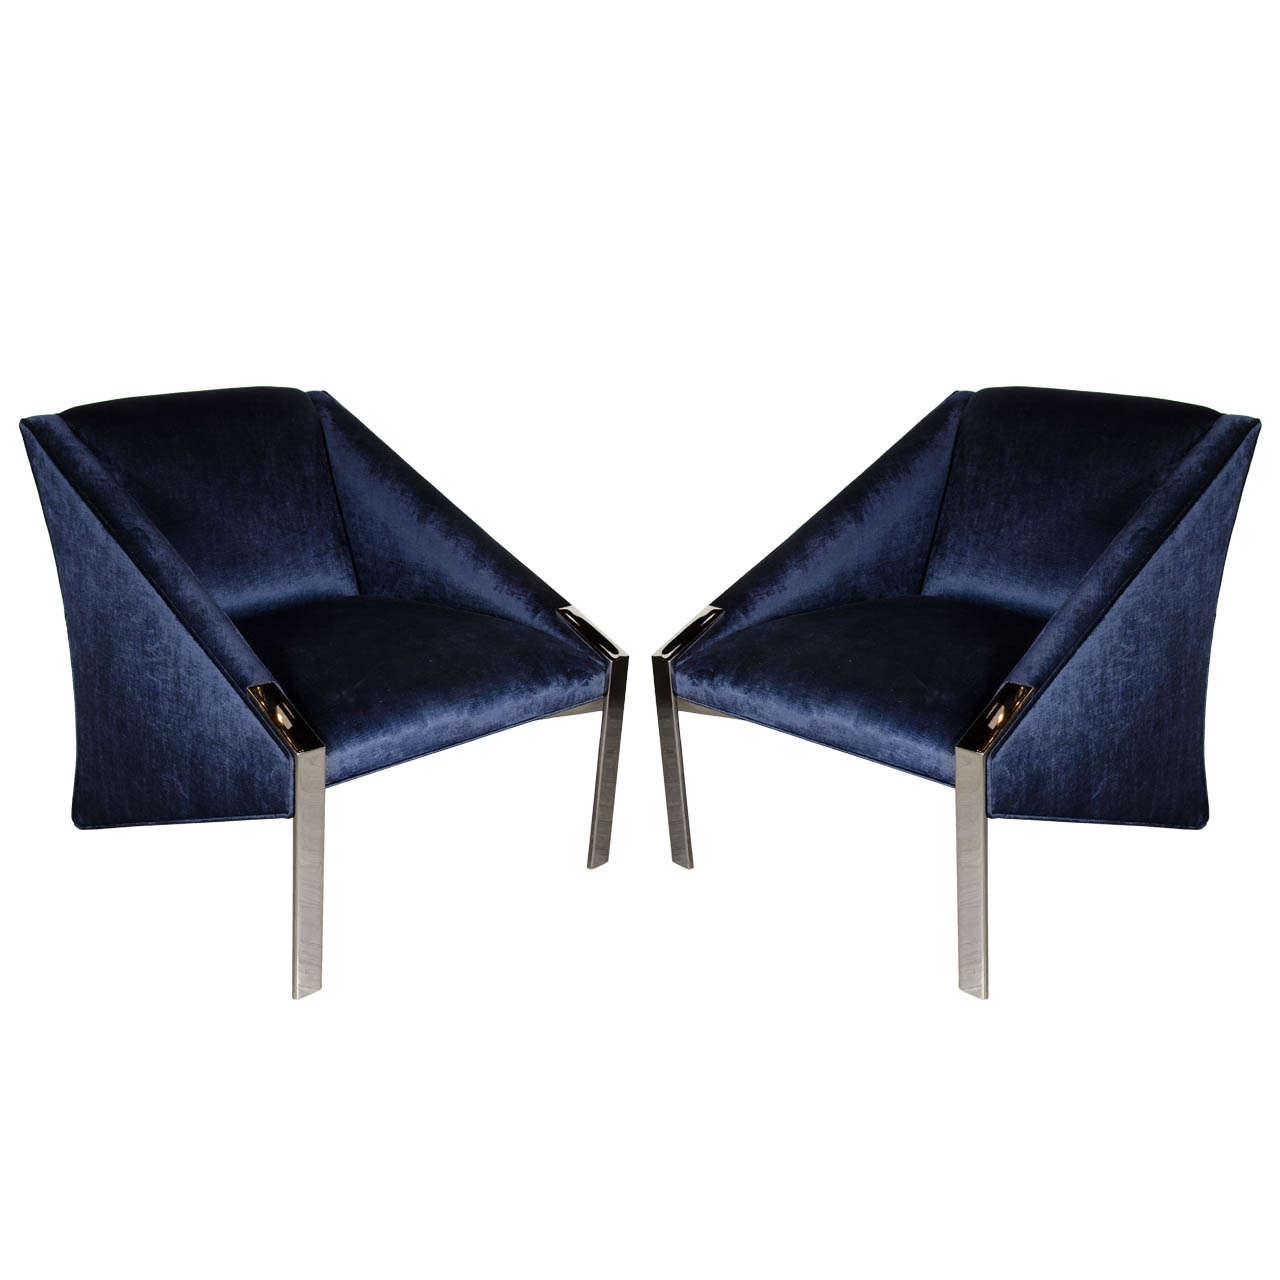 Pair of Modernist Angular Club Chairs Attributed to Milo Baughman